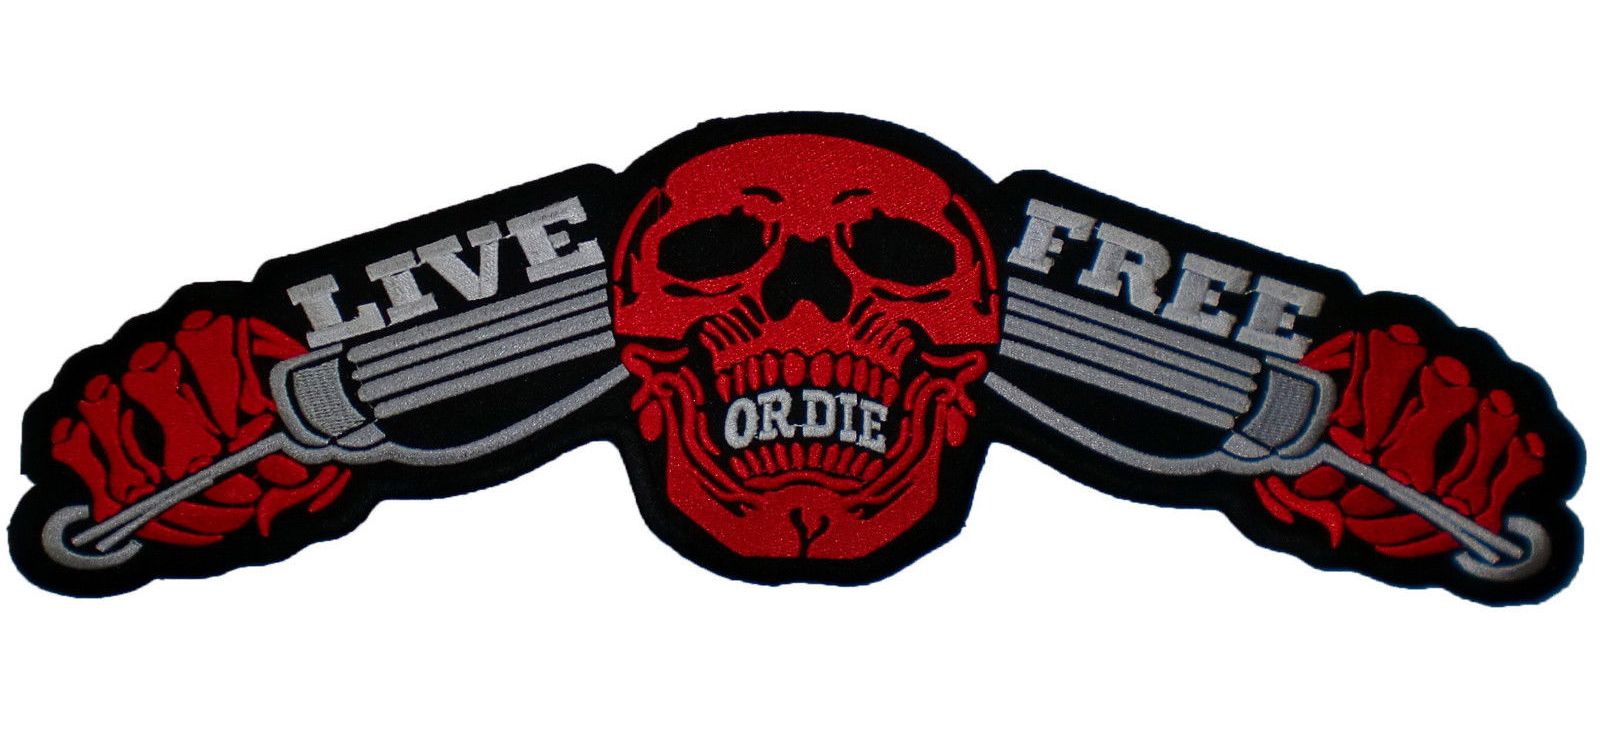 LARGE SIZE LIVE FREE or DIE Red Skull Motorcycles Biker Jacket Sew Iron on Patch 